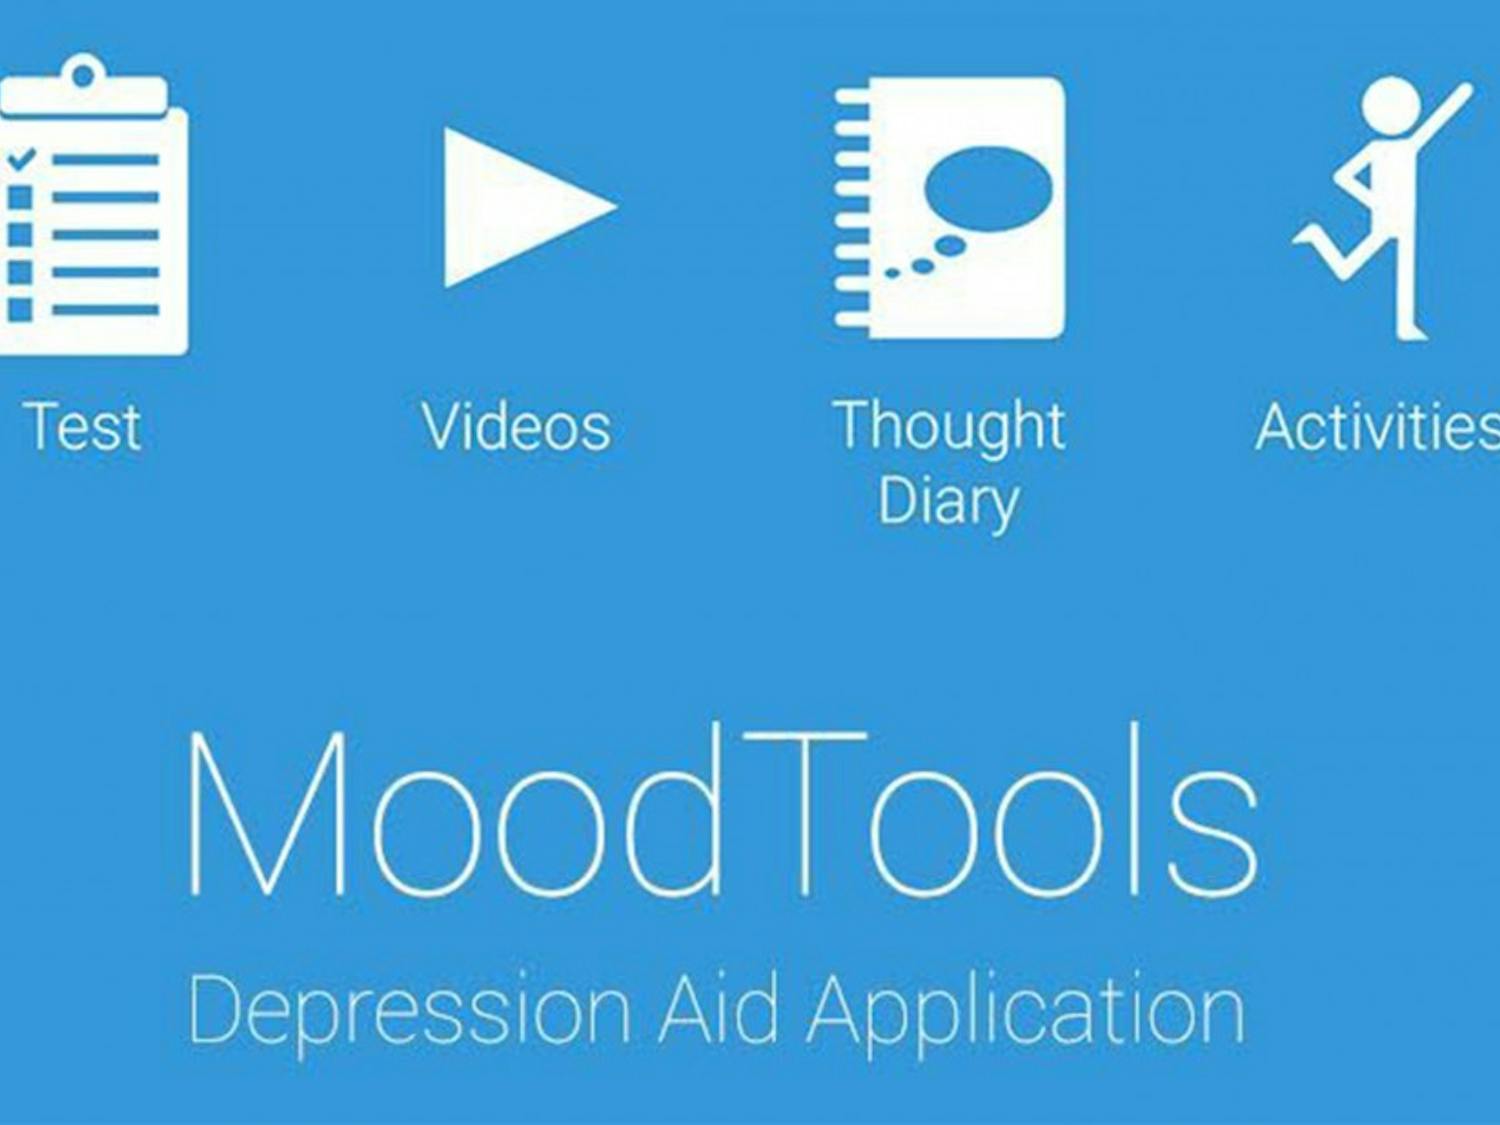 MoodTools, an app launched by two Class of 2015 graduates, has been downloaded more than 125,000 times in the past 15 months.